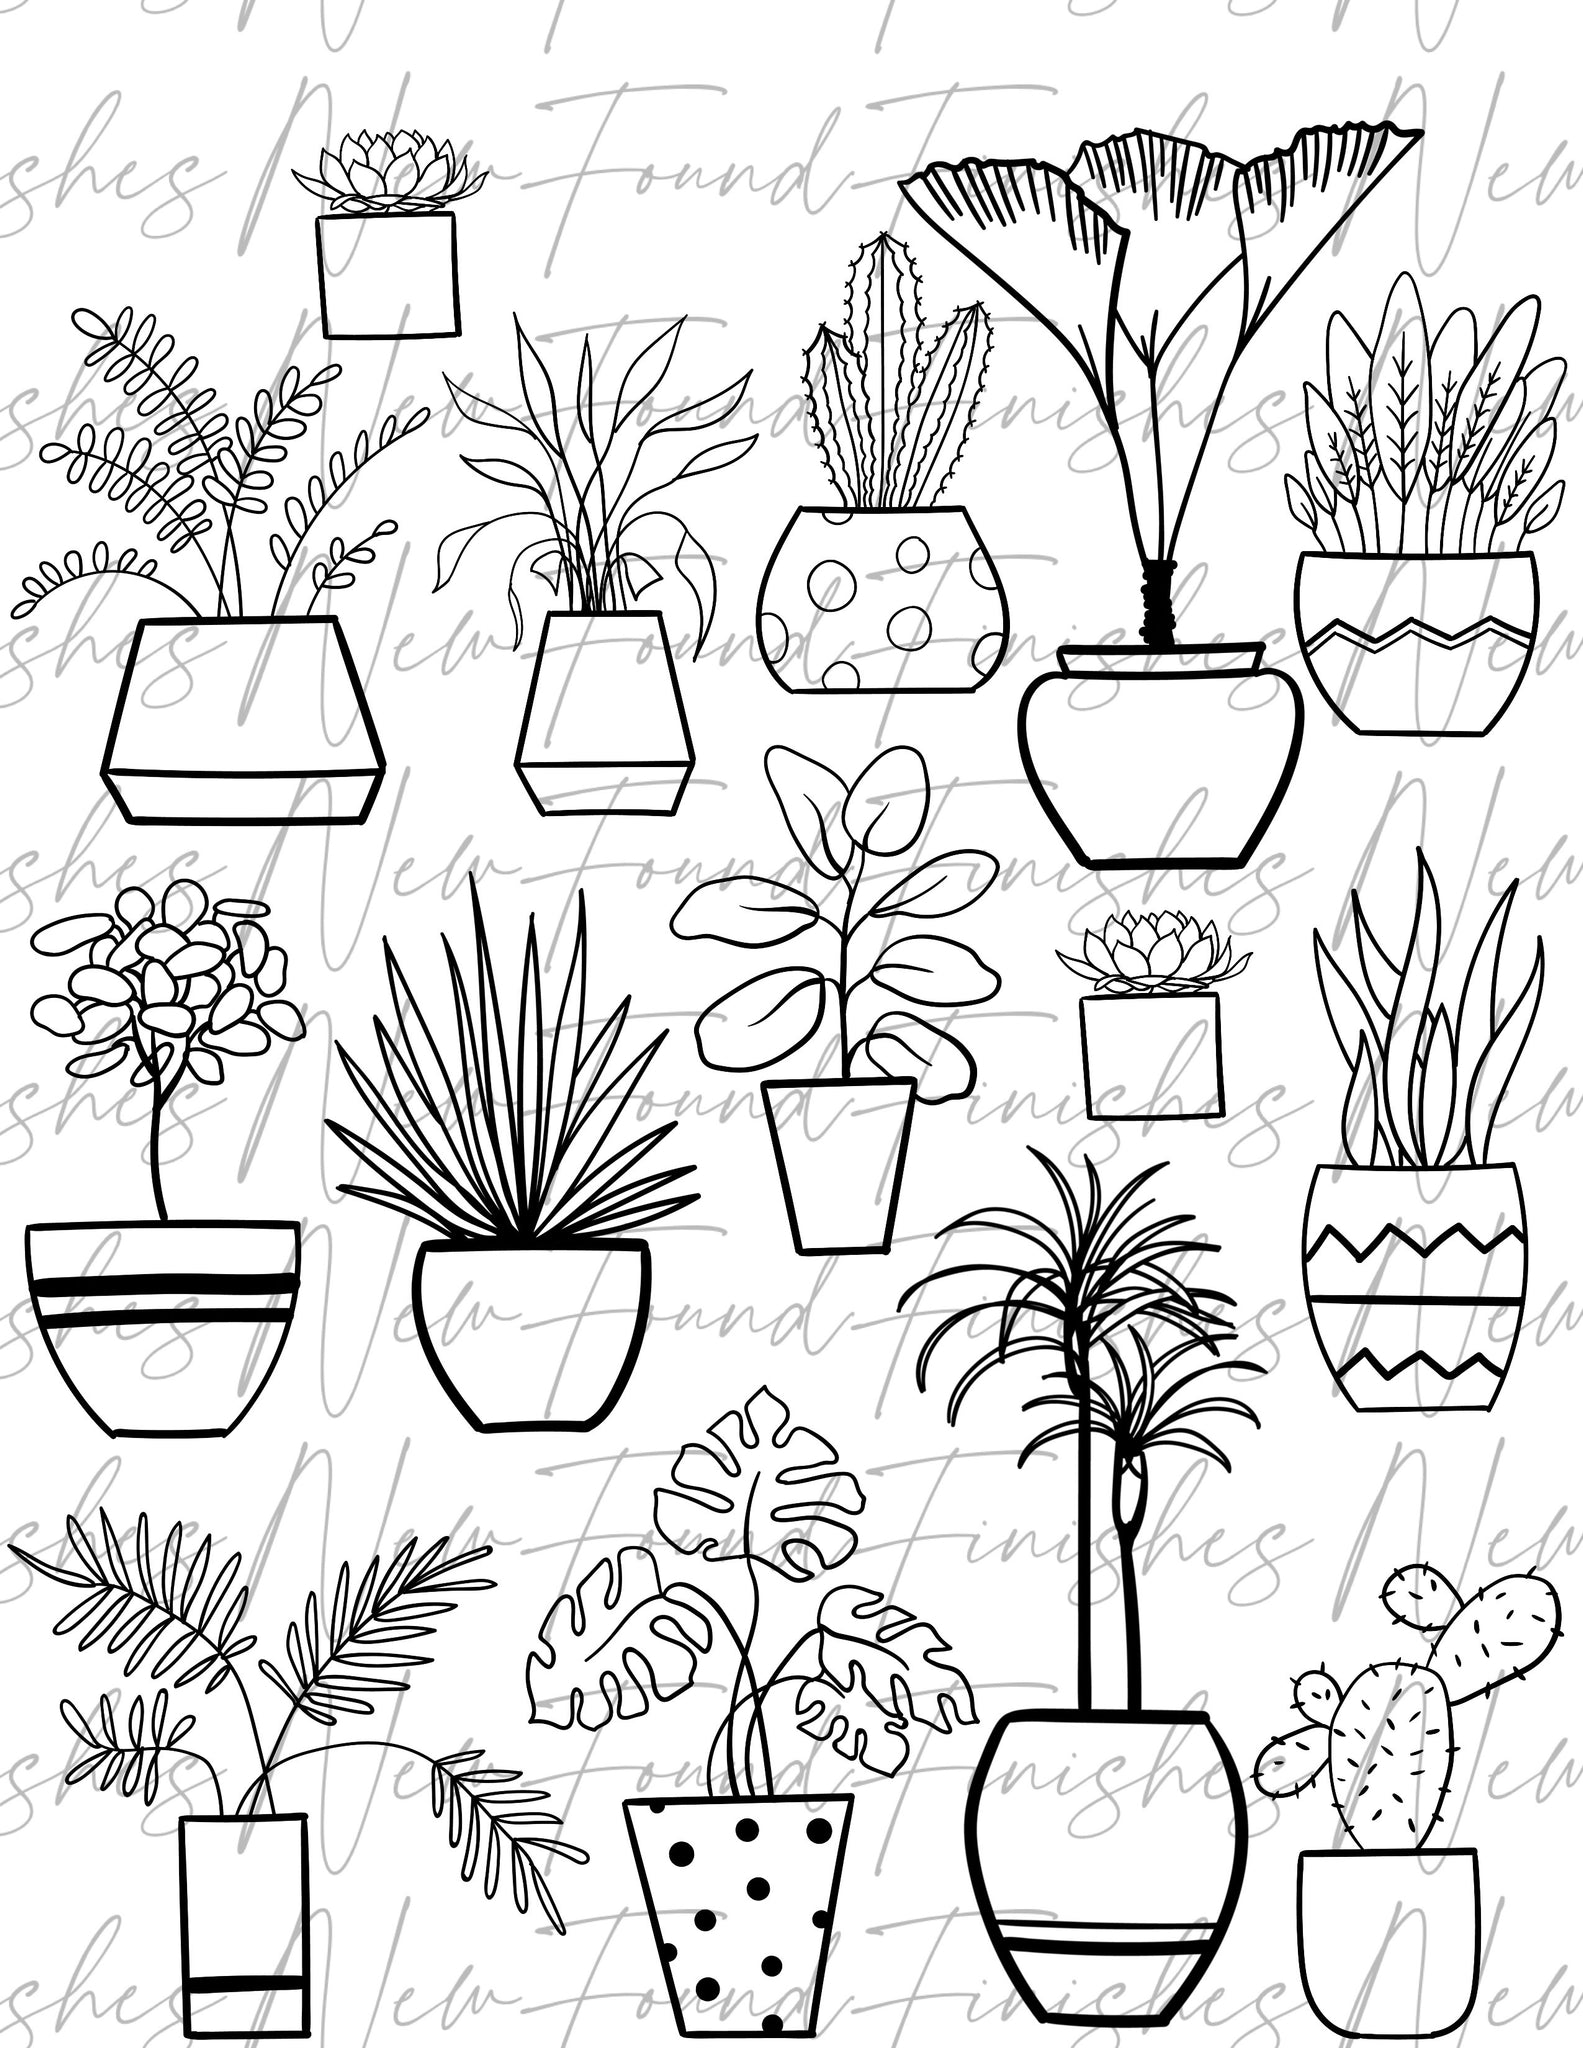 Potted plants line drawing 2 DARK